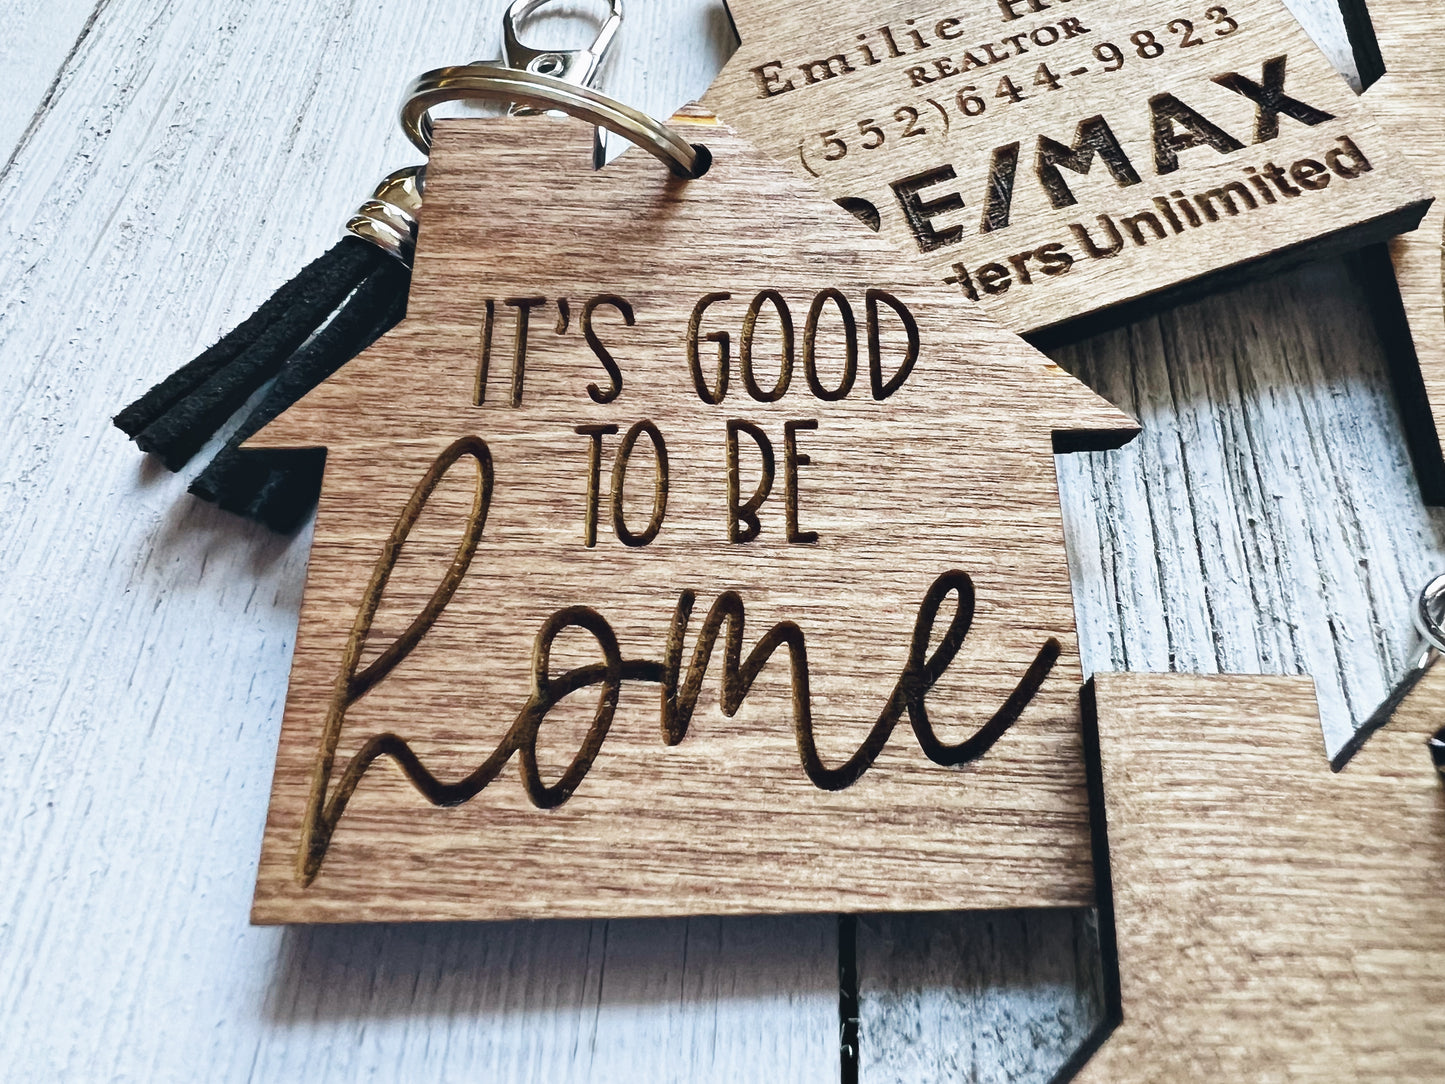 Personalized Realtor Keychain (set of 10)